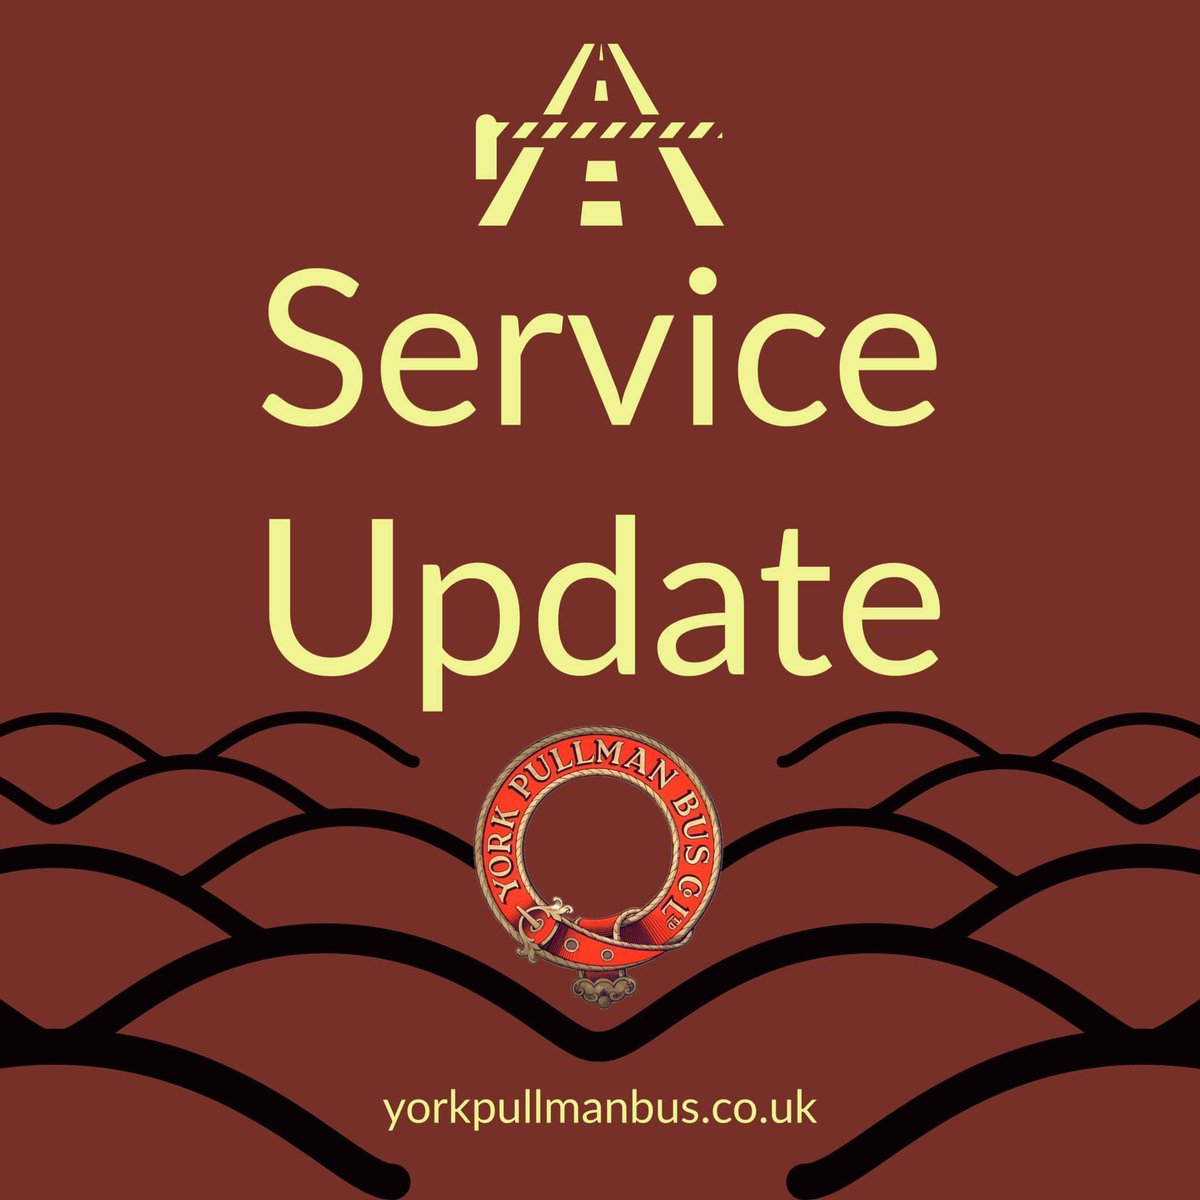 Service Update #19 We are still seeing delays of up to 10 minutes coming into #York due to the road closure on A1M. Please allow extra time for your journey.